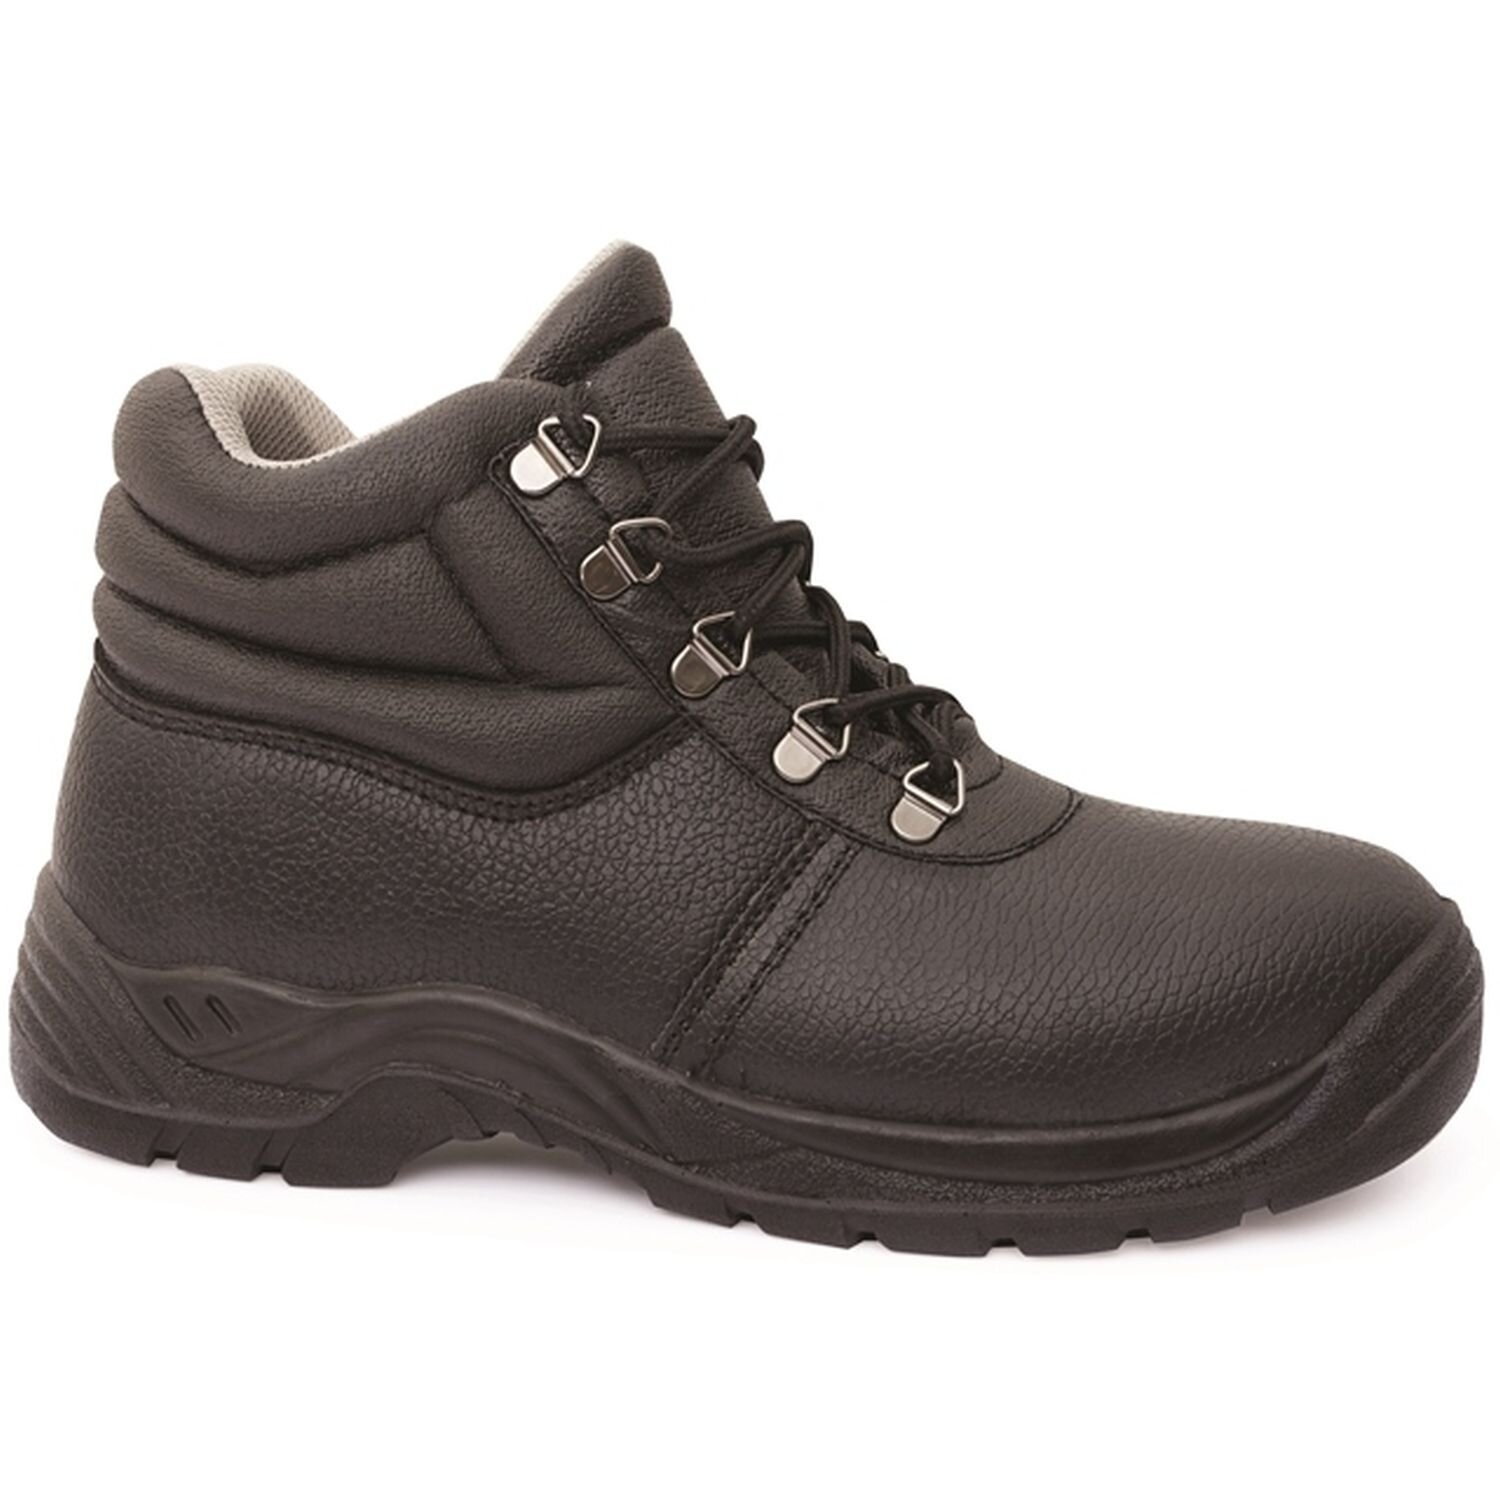 Bison Duty Steel Toe Lace Up Safety Boot Black